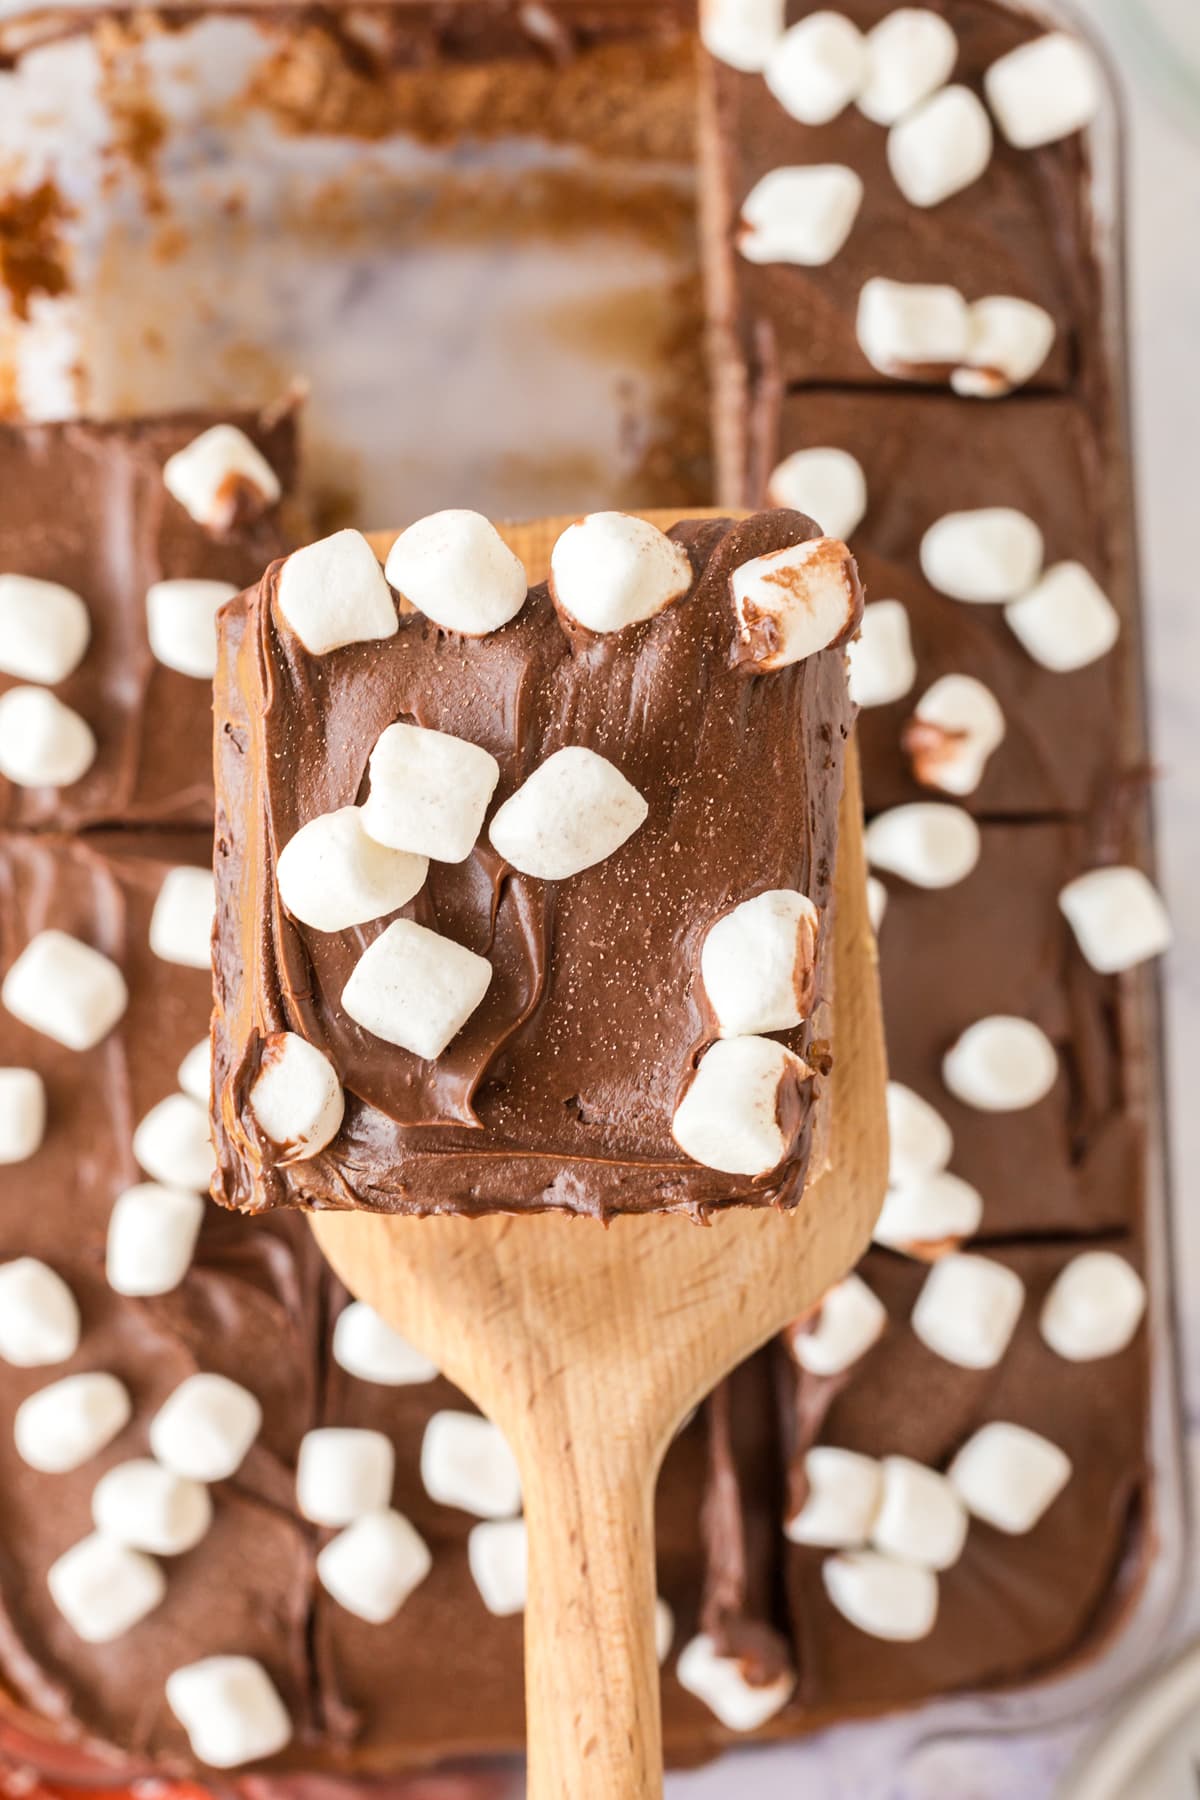 A Hot Chocolate Poke Cake square on a wooden laddle.